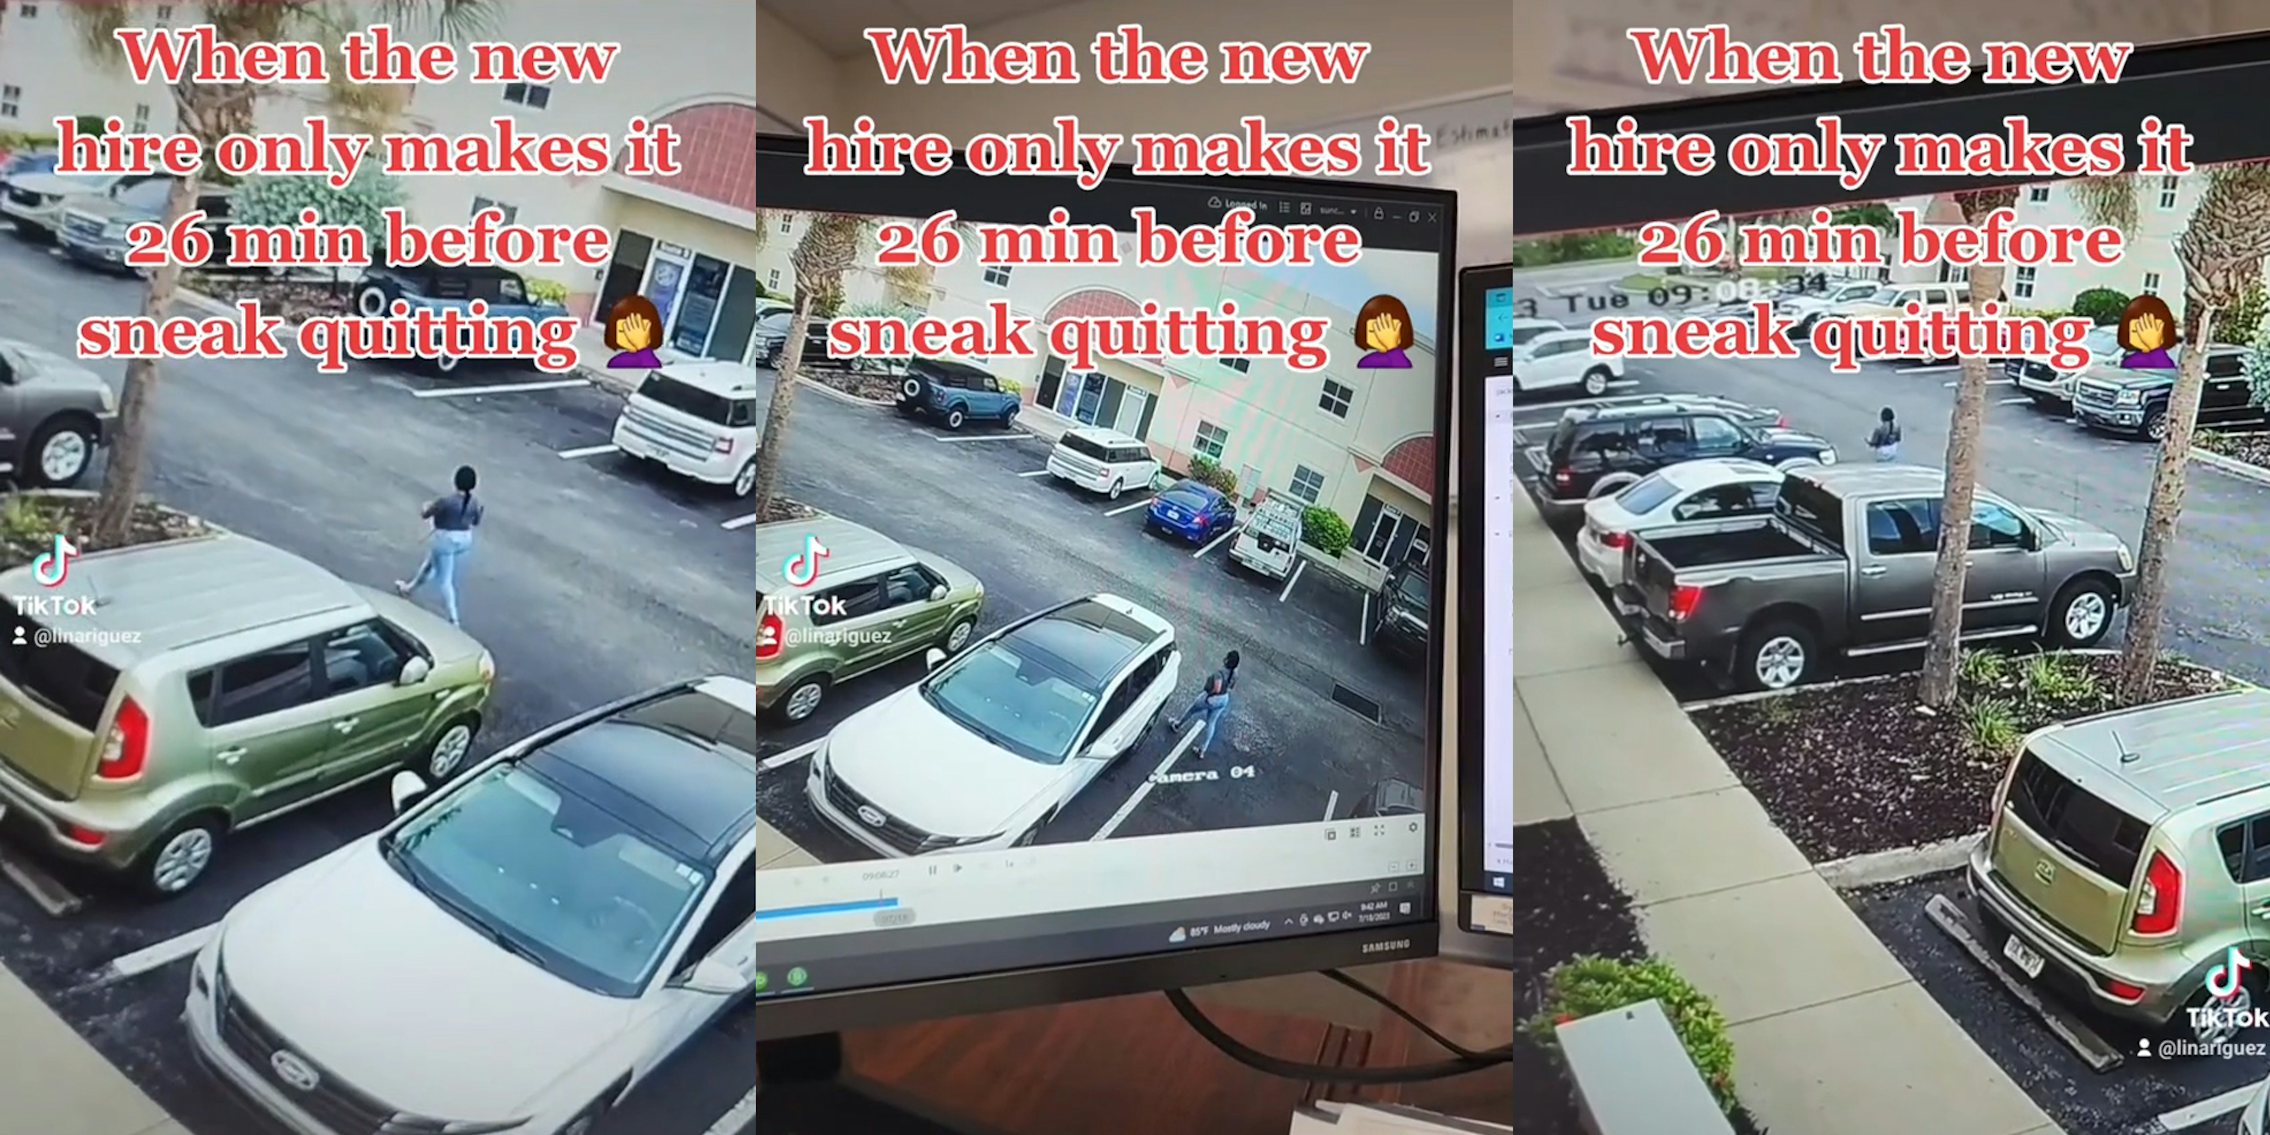 security footage on monitor showing worker walking to car with caption 'When the new hire only makes it 26 min before sneak quitting' (l) security footage on monitor showing worker walking to car with caption 'When the new hire only makes it 26 min before sneak quitting' (c) security footage on monitor showing worker walking to car with caption 'When the new hire only makes it 26 min before sneak quitting' (r)